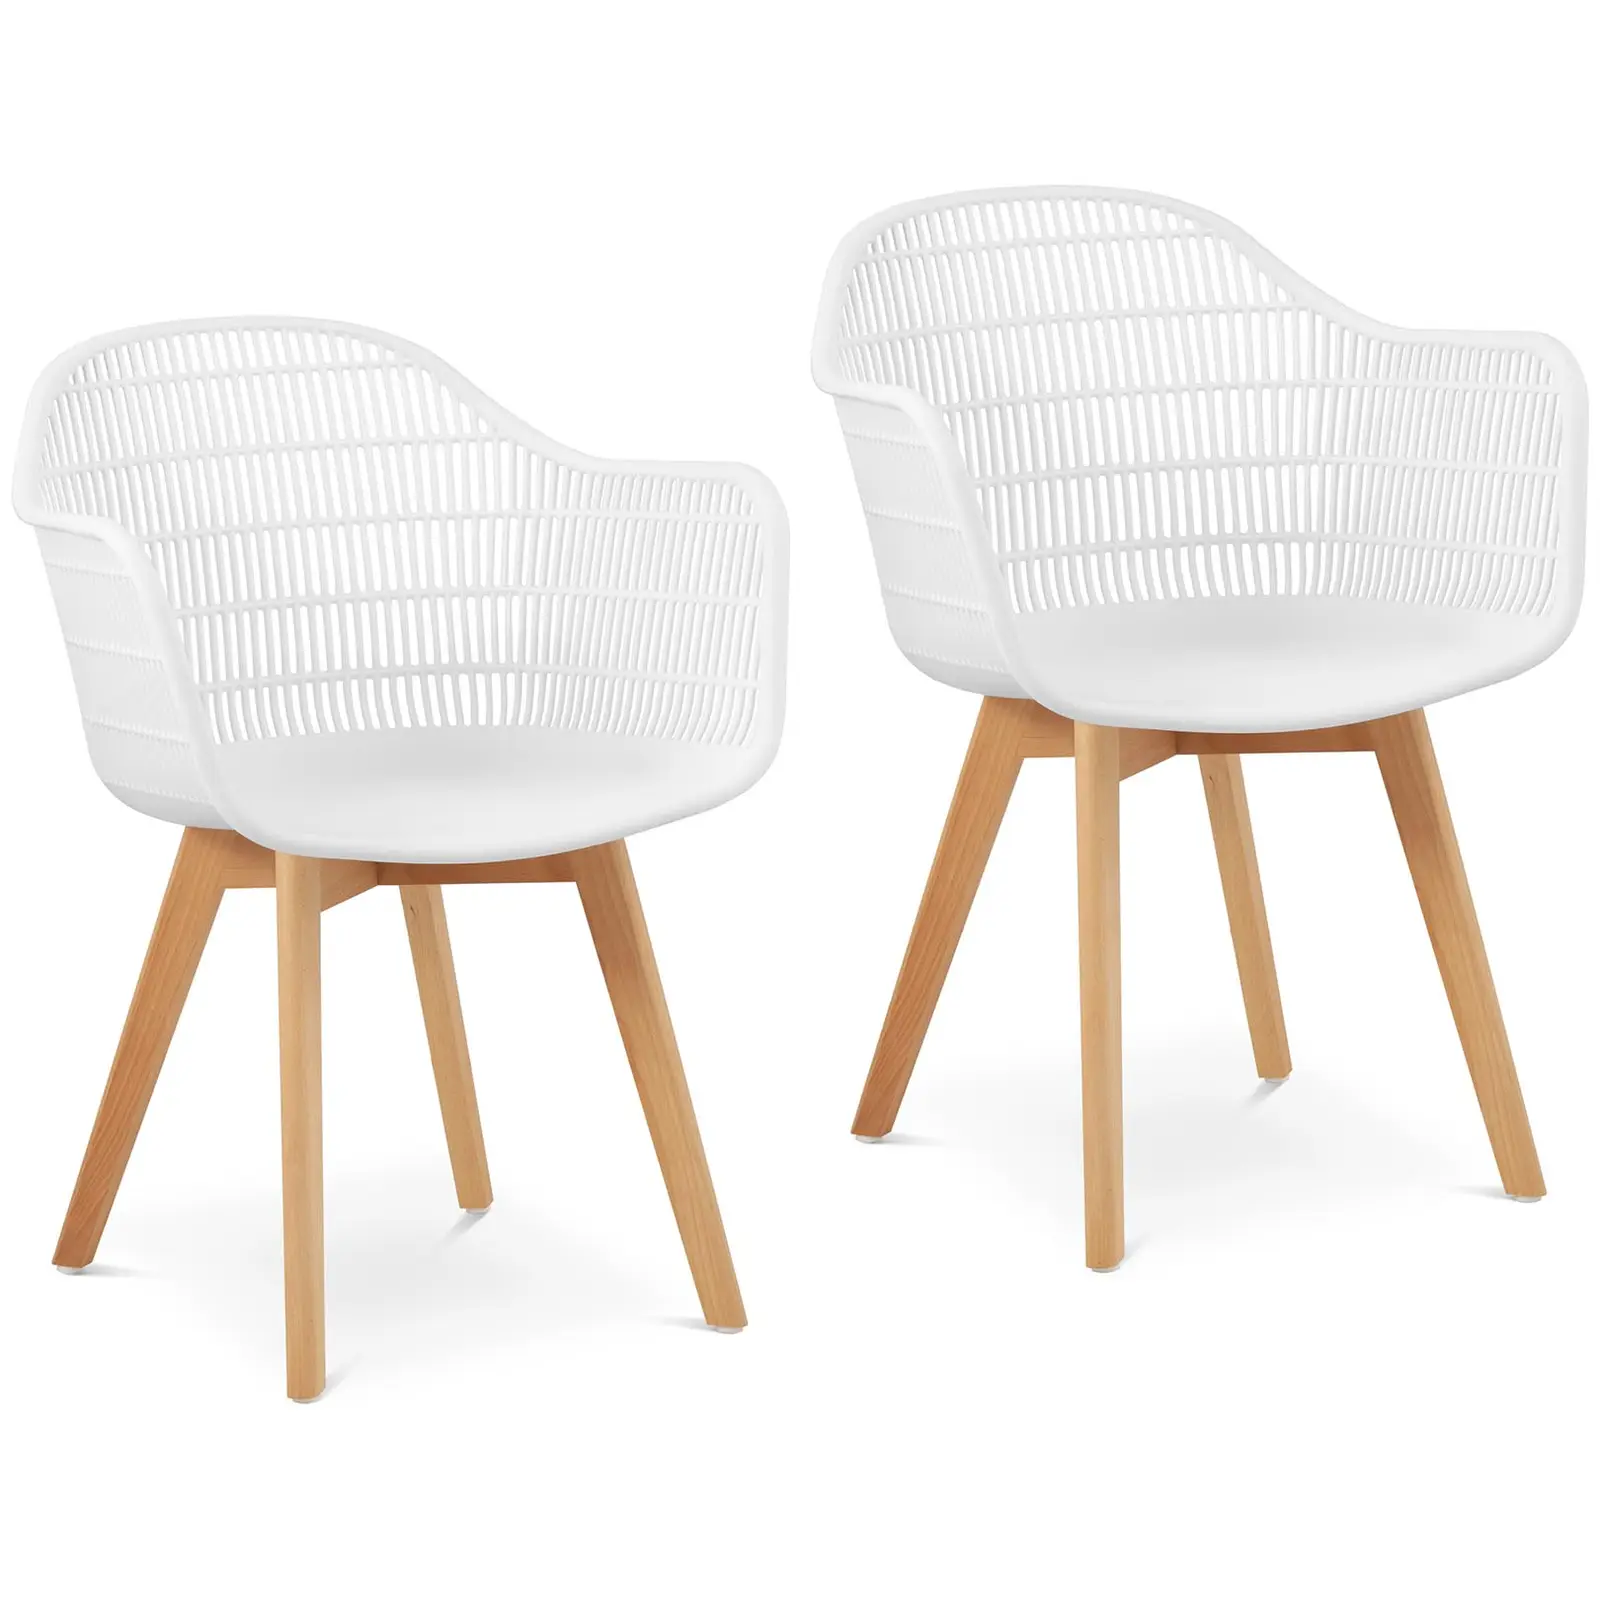 Chair - set of 2 - up to 150 kg - seat area  490x450x450 mm - White